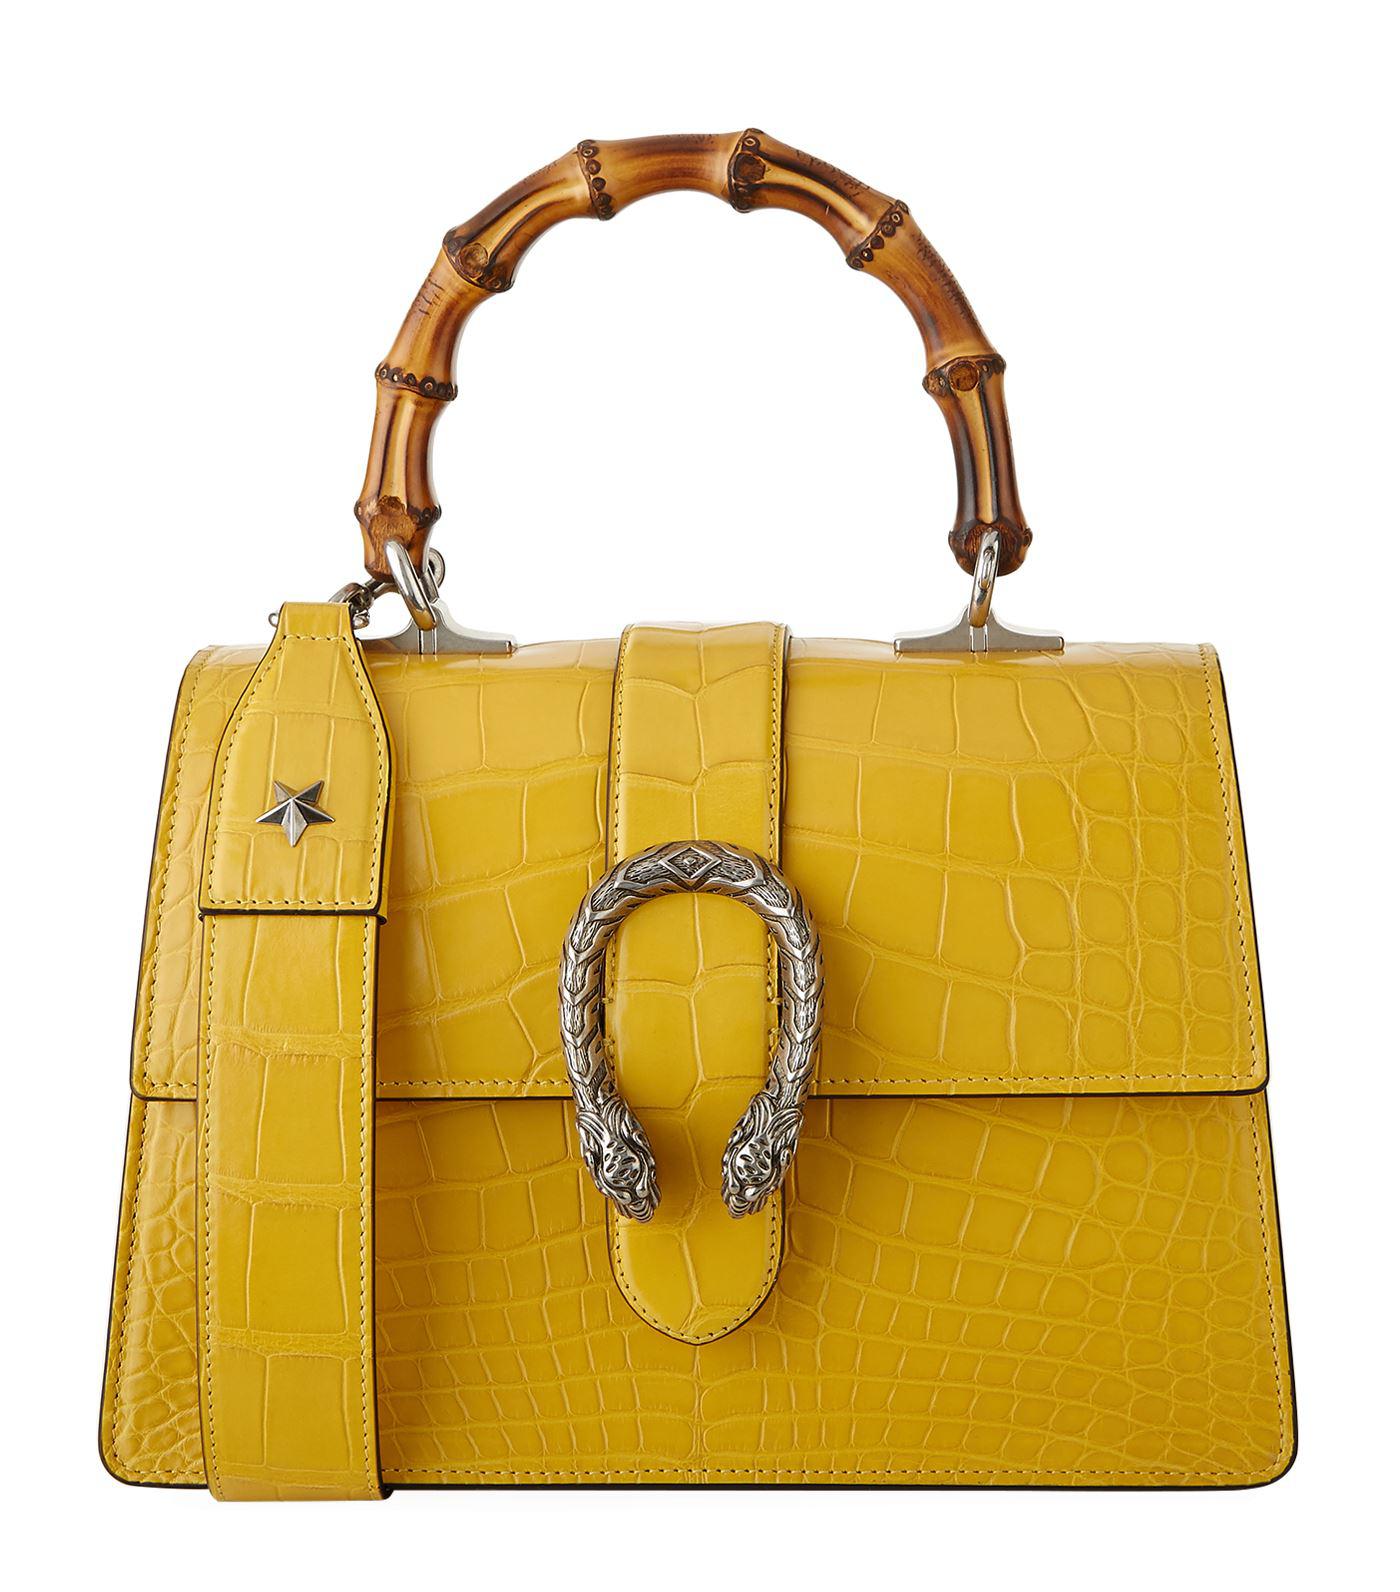 Gucci Leather Small Dionysus Bamboo Top Handle Bag in Yellow - Lyst